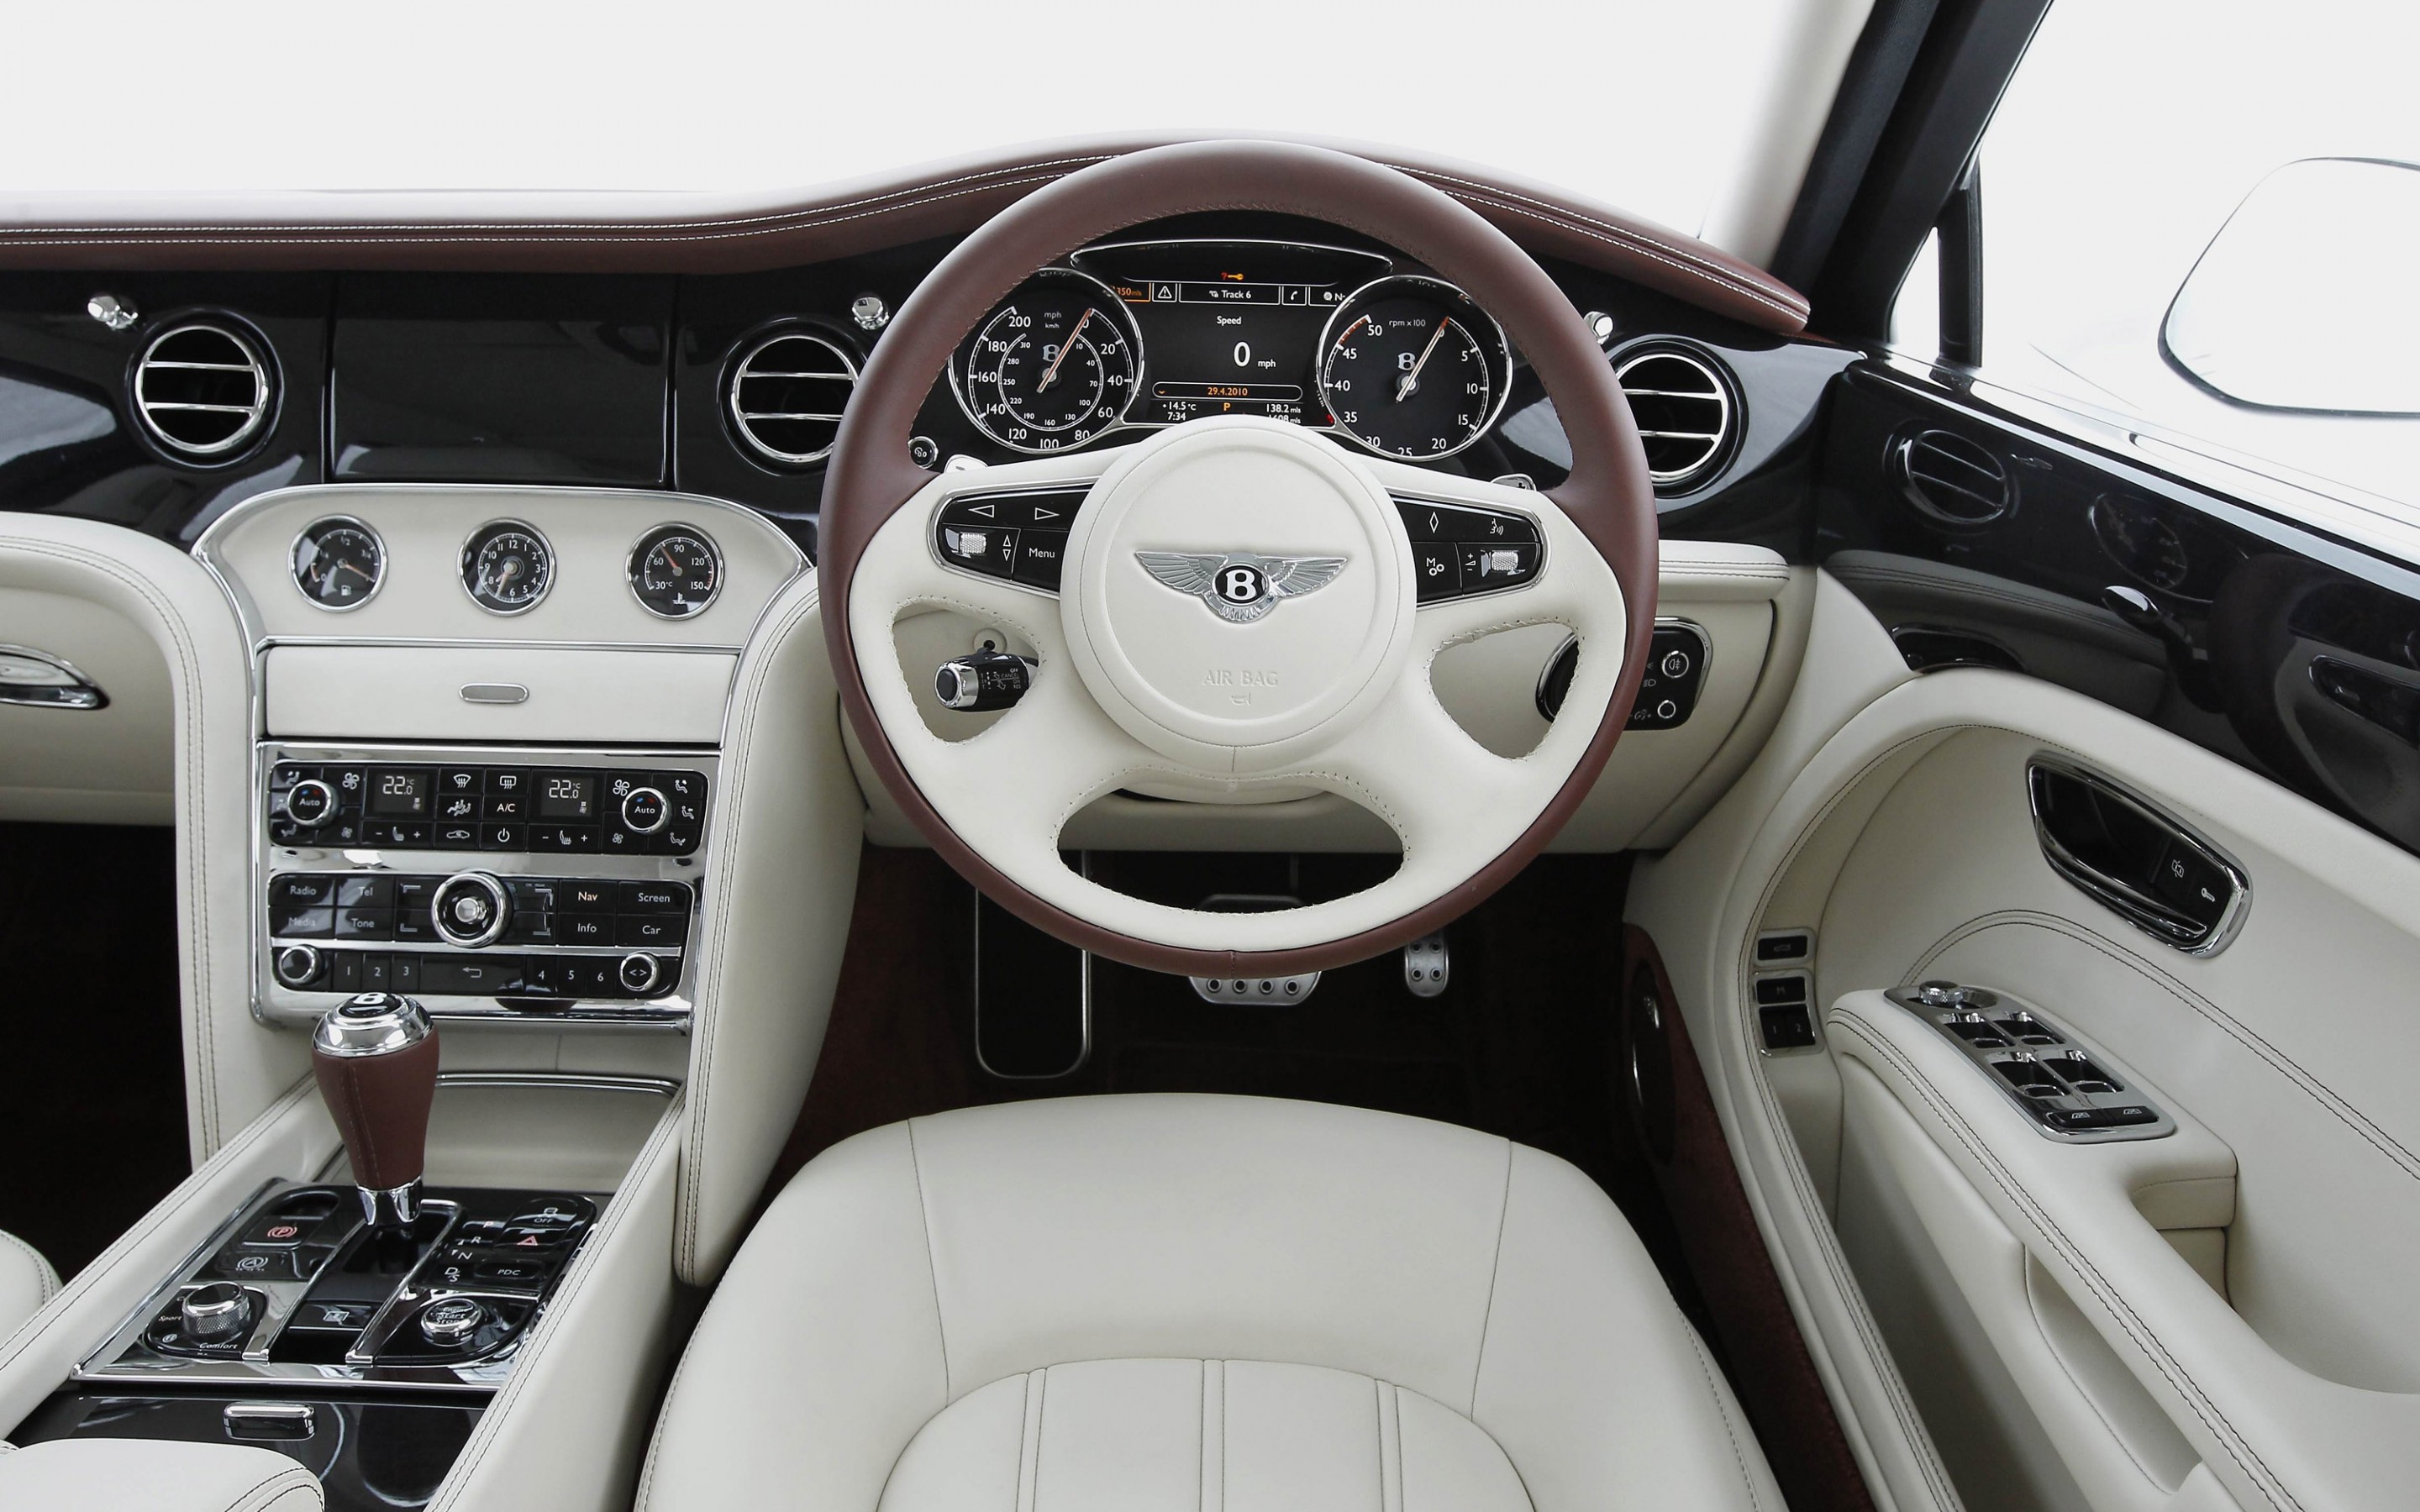 interior, dashboard, car, luxury collection of HD images